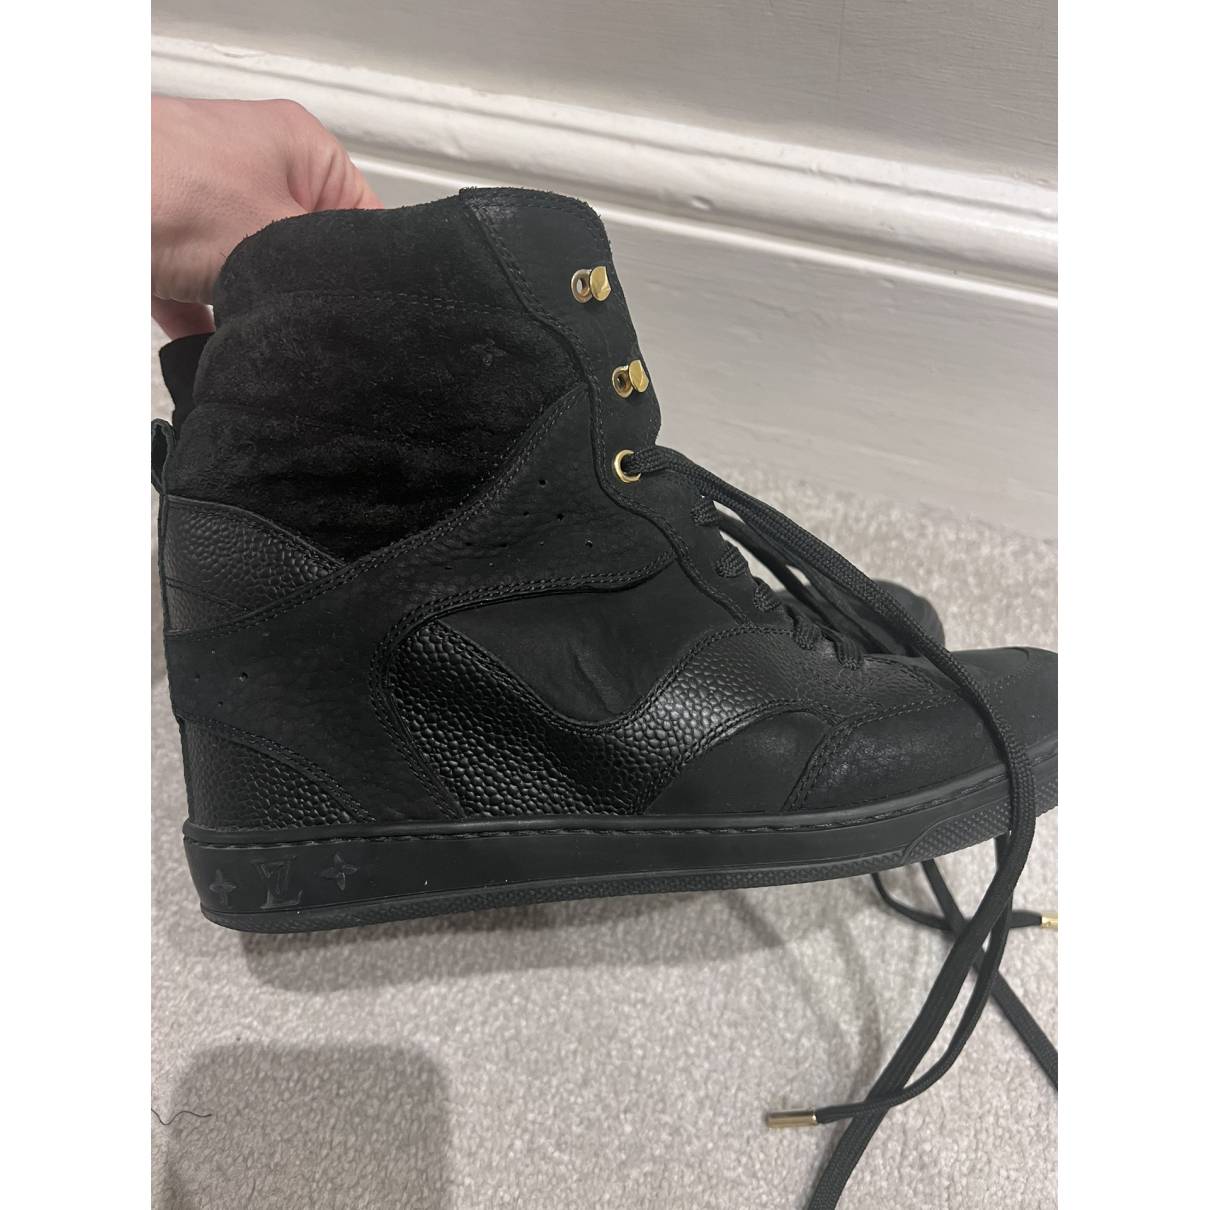 Louis Vuitton - Authenticated Trainer - Suede Black for Women, Very Good Condition